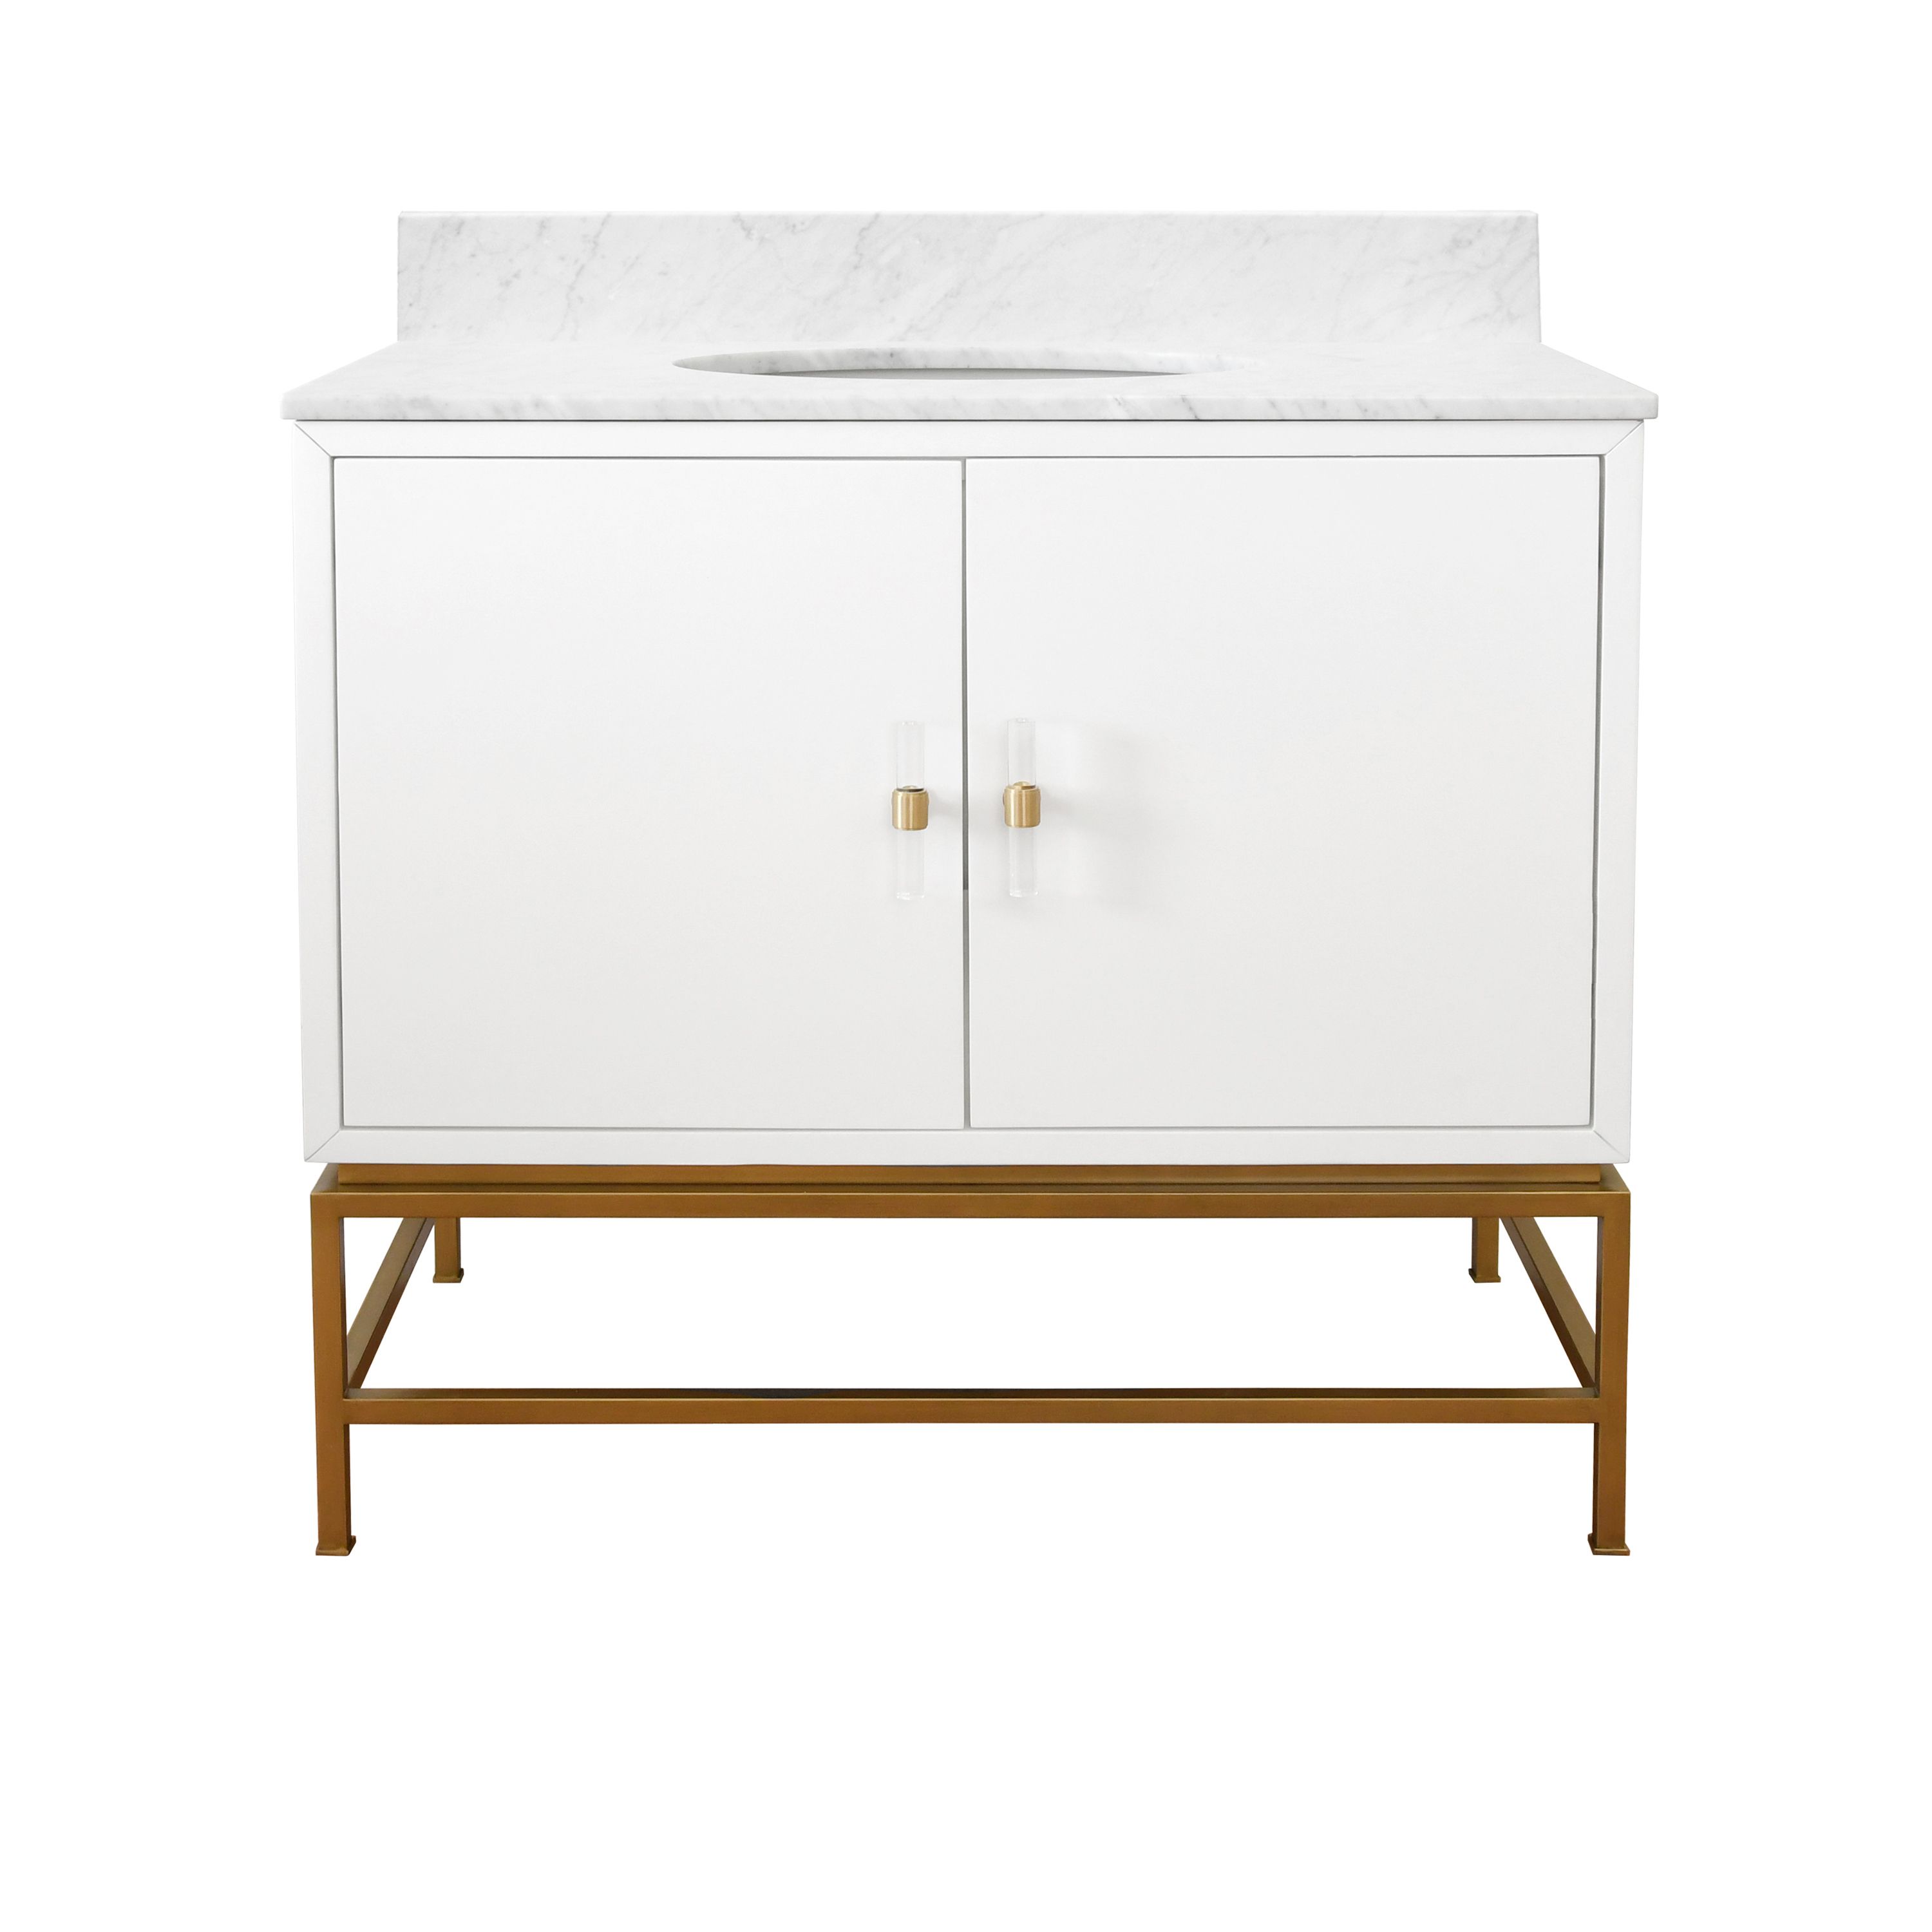 Bath Vanity in Matte White Lacquer and Antique Brass with White Marble Top and Porcelain Sink